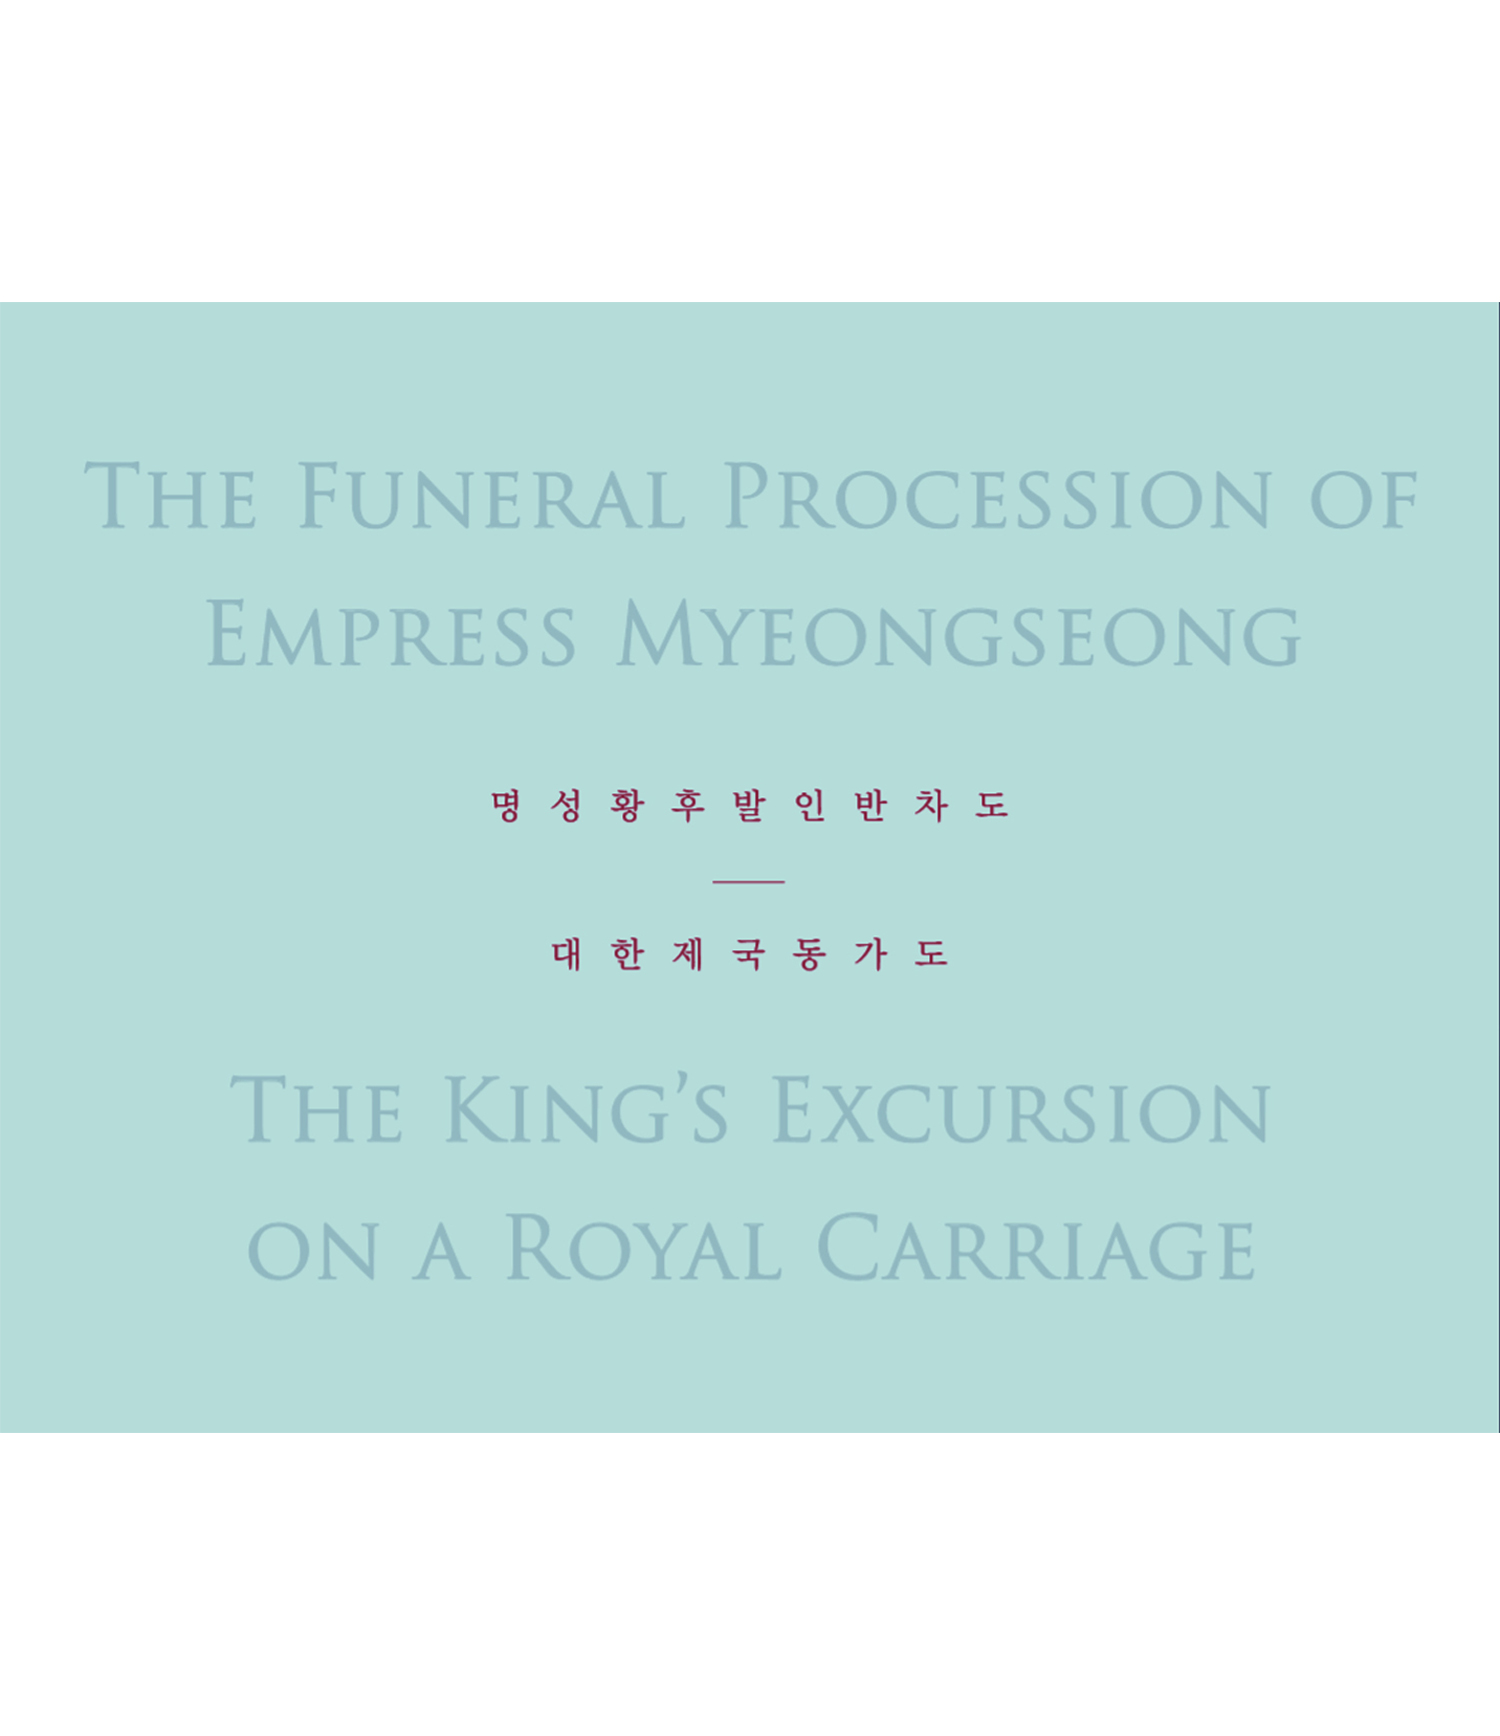 The Funeral Procession of Empress Myeonseong and The King’s Excursion on a Royal Carriage from Ewha Womans University Mu